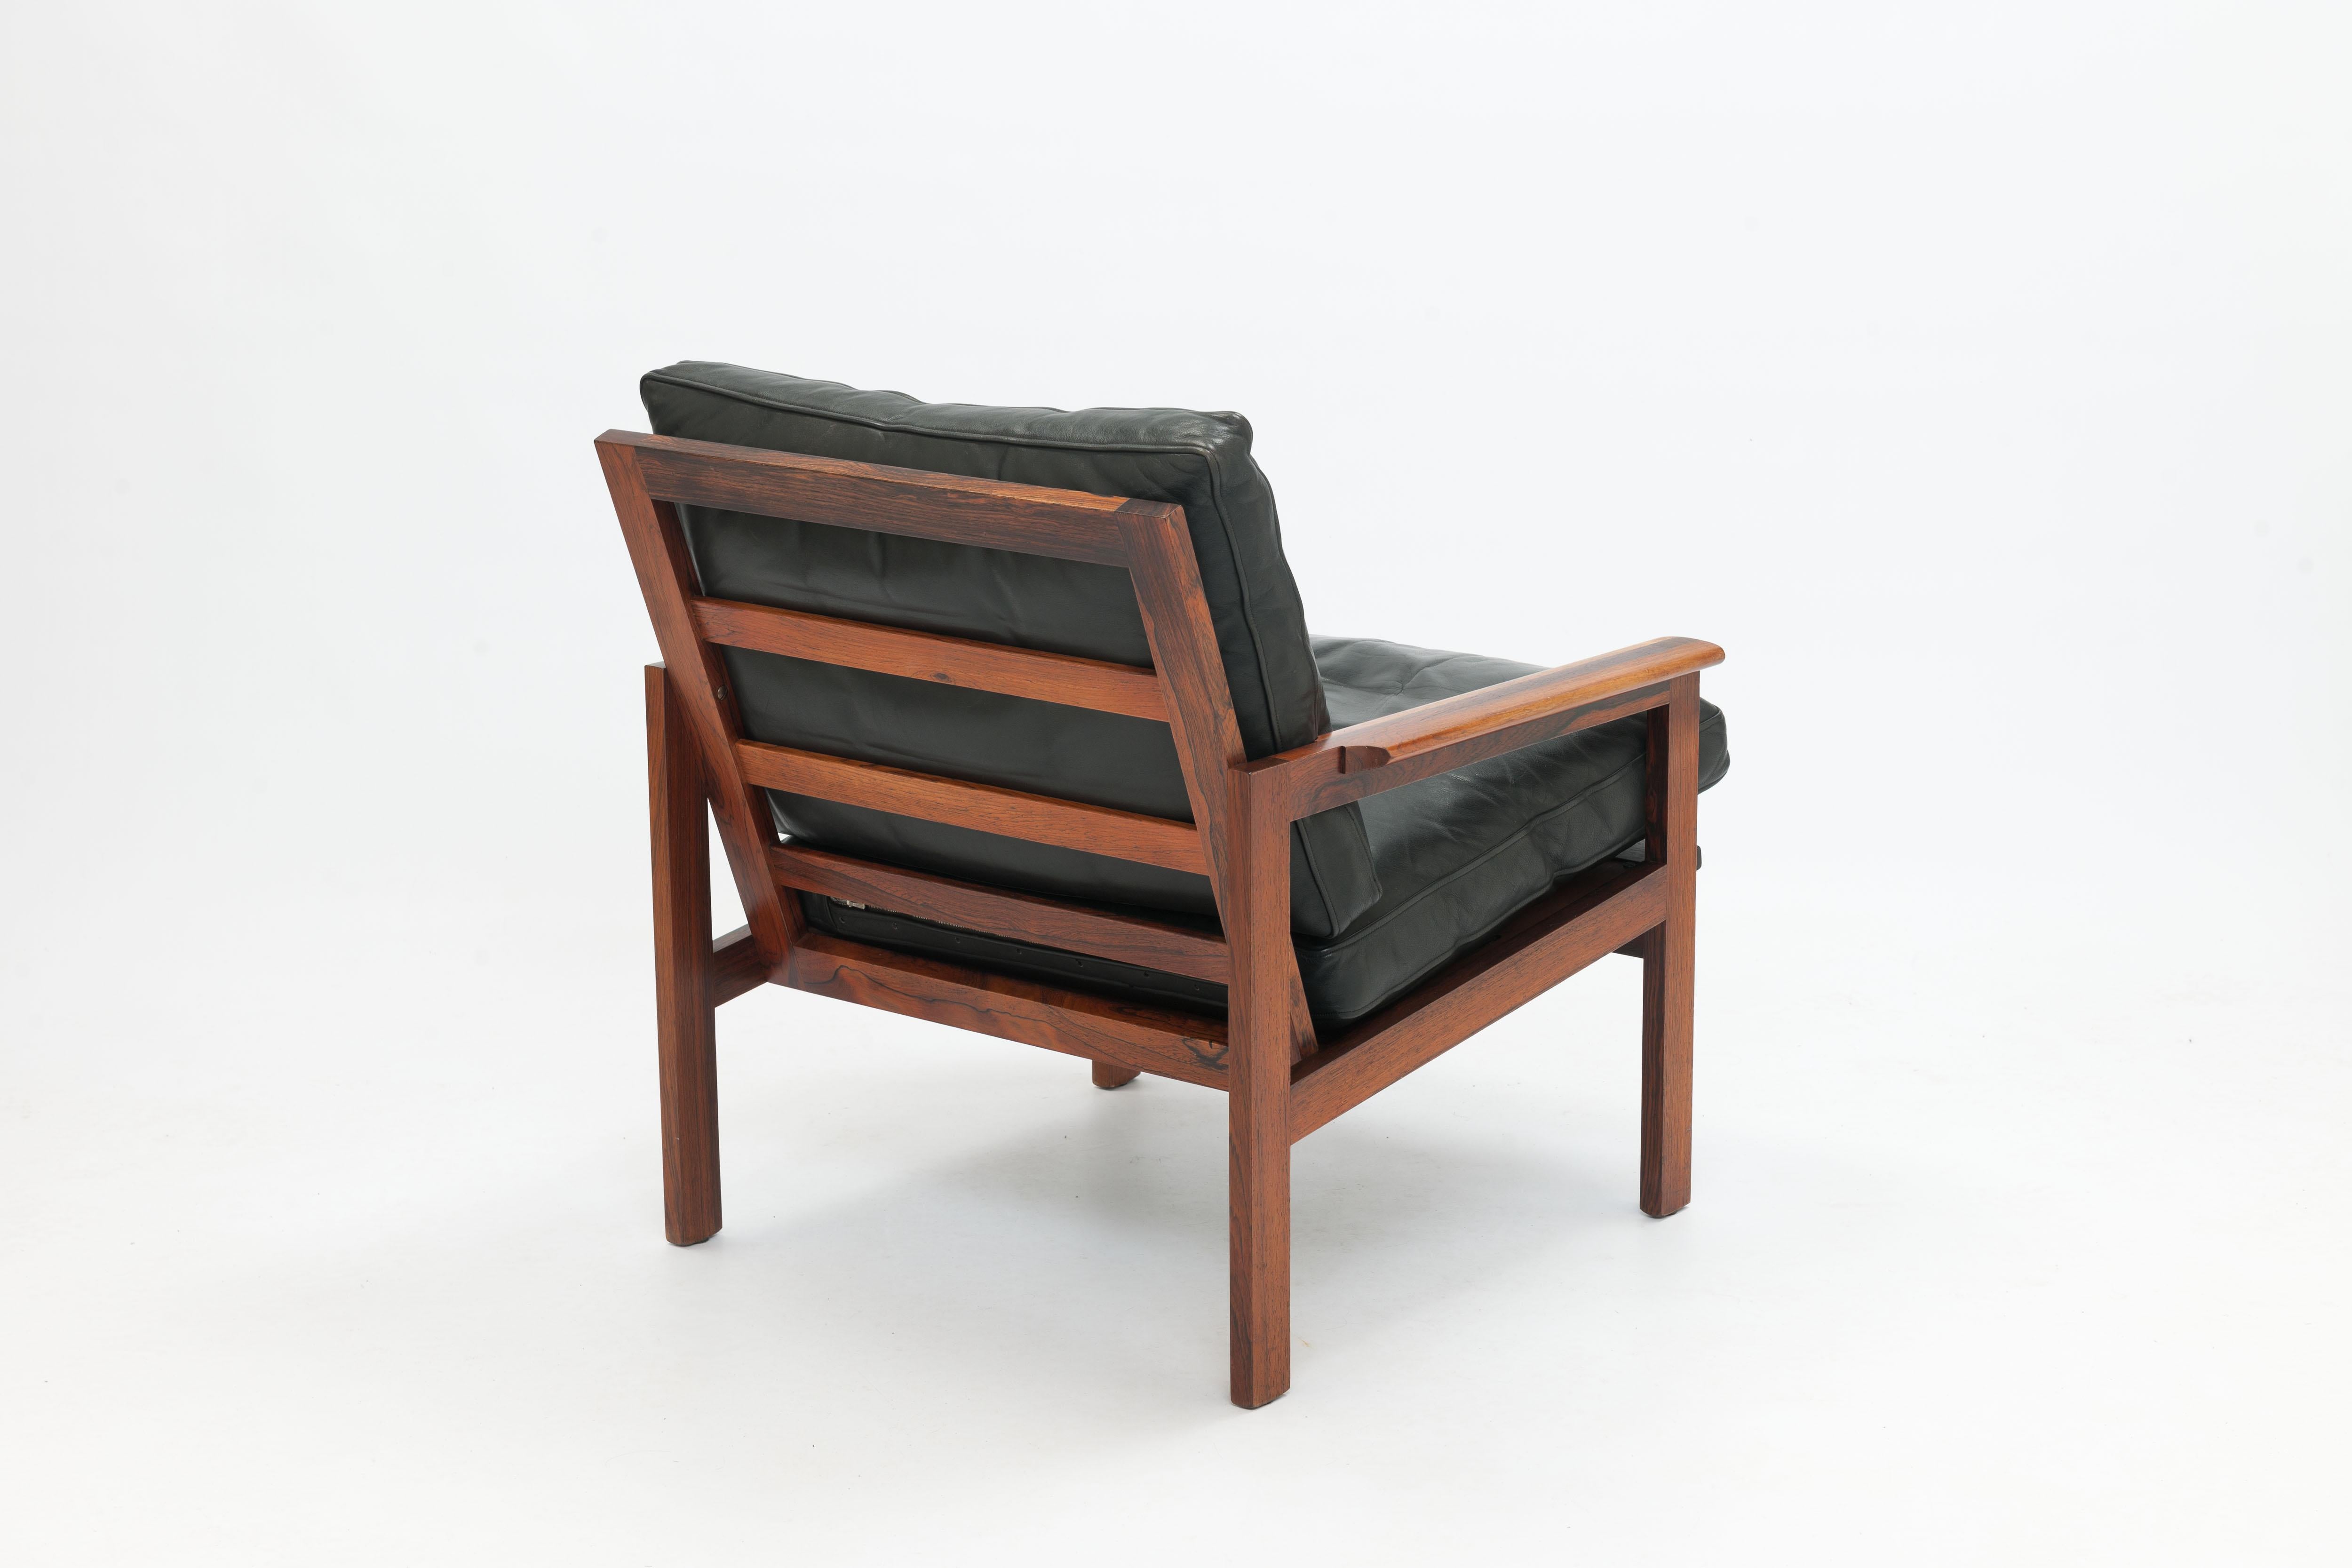 Danish Rosewood & Black Leather Capella Arm Chair by Illum Wikkelsø, Pair Available